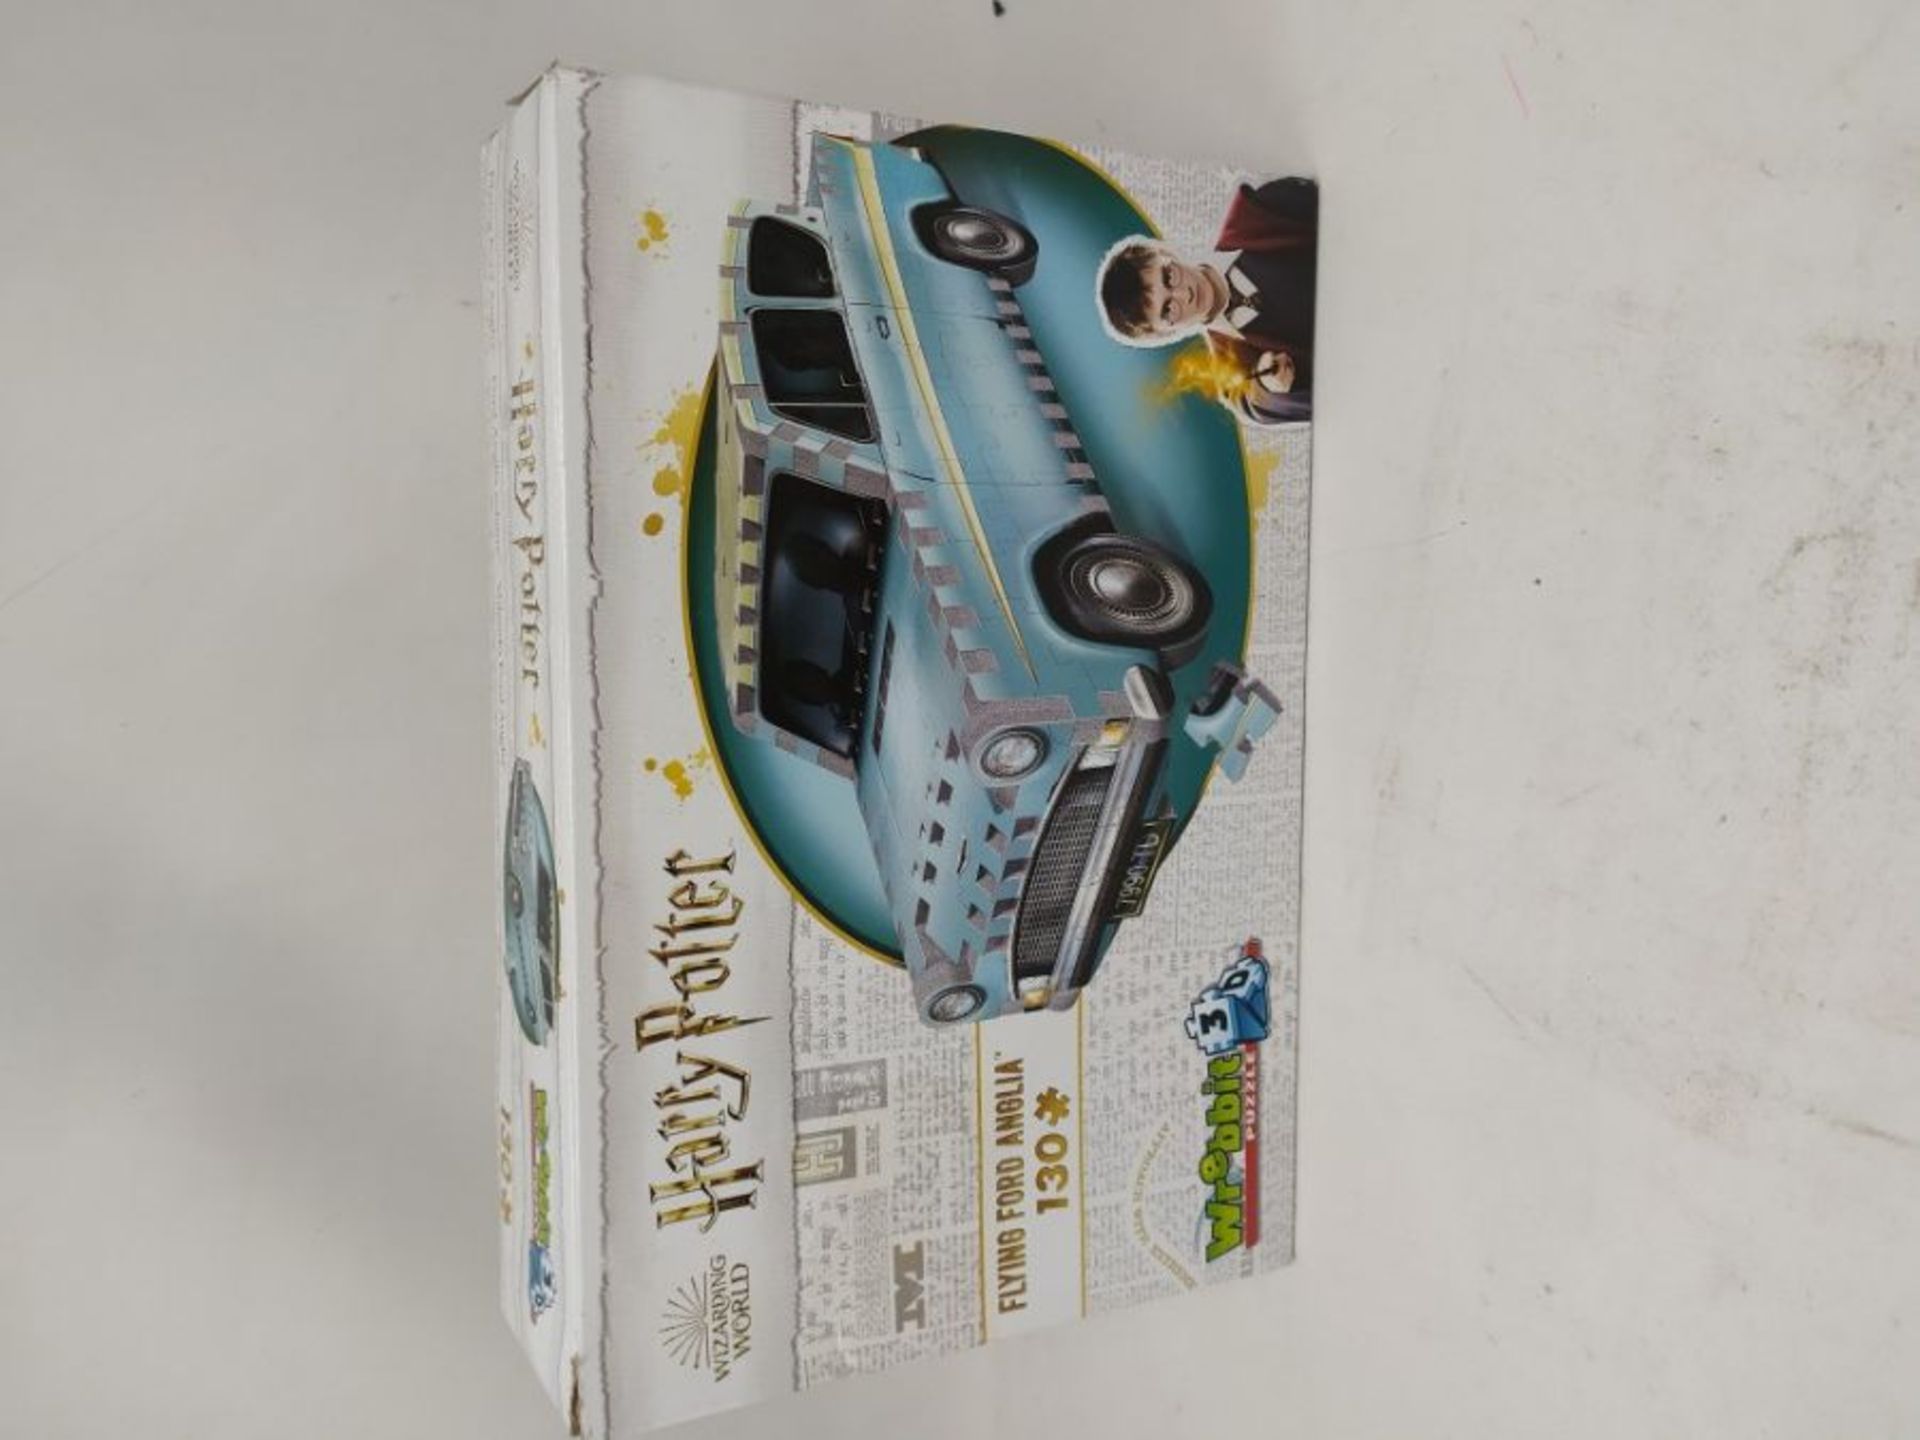 Wrebbit 3D Harry Potter: Flying Ford Anglia Mini (130pc) - Image 2 of 3